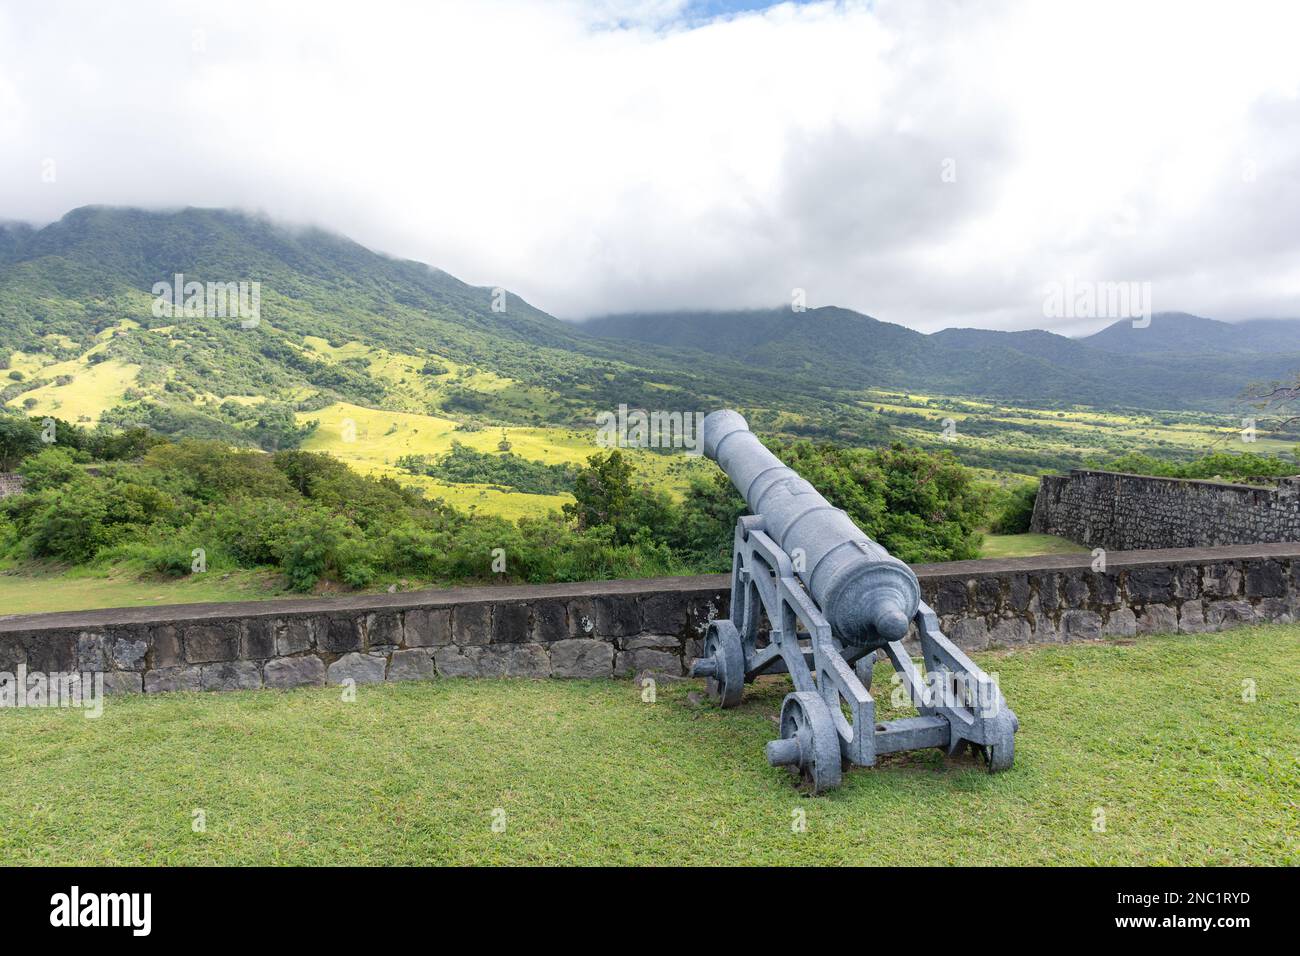 Cannone 17th ° secolo, Brimstone Hill Fortezza National Park, Sandy Point Town, St Kitts, St. Kitts e Nevis, piccole Antille, Caraibi Foto Stock